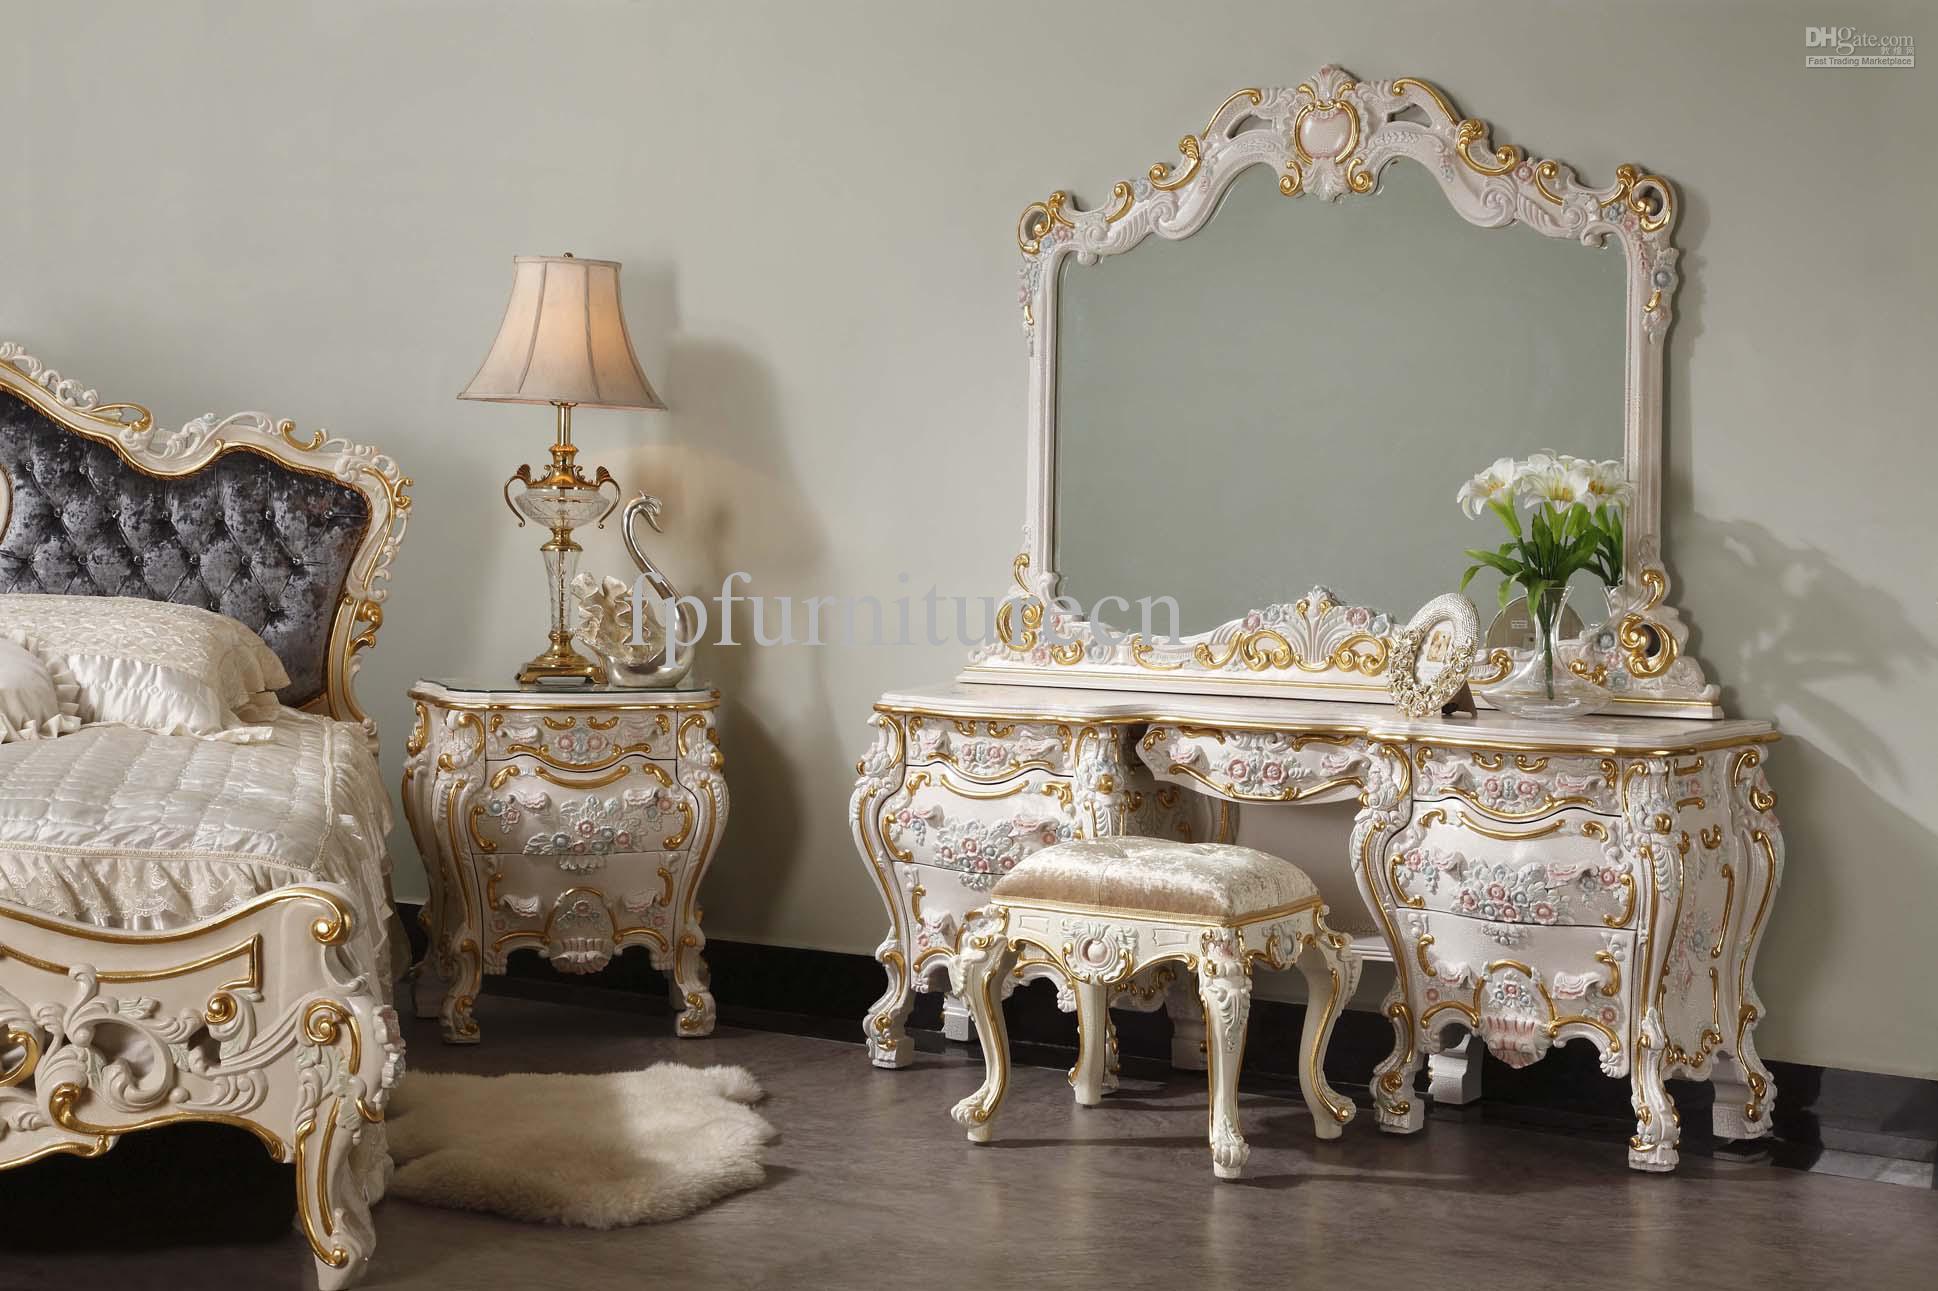 French furniture gorgeous palace furniture, French castle furniture, home furniture free shipping prlqsgb ZWGTBBQ